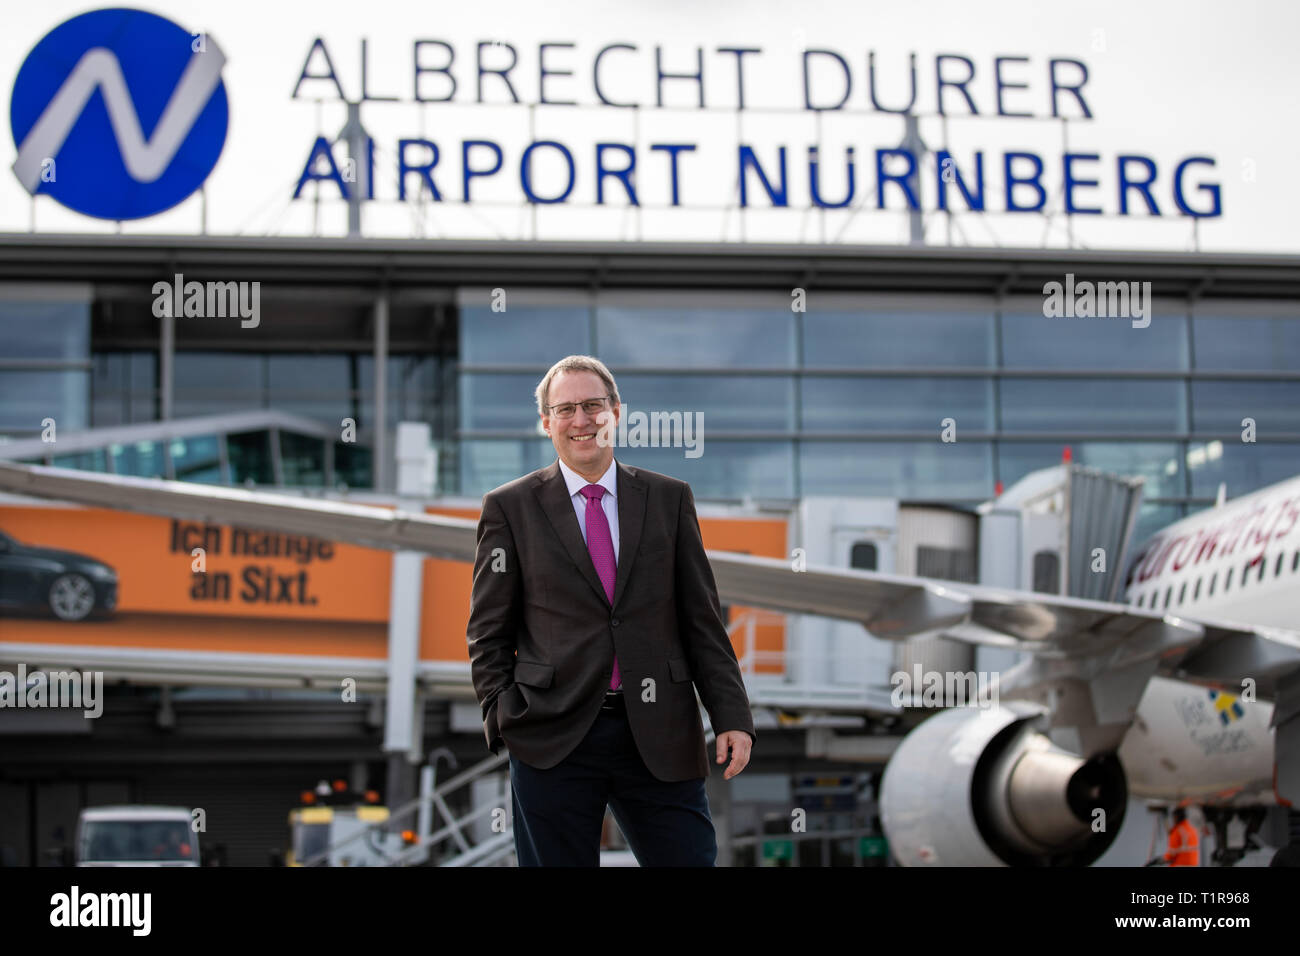 28 March 2019, Bavaria, Nürnberg: Michael Hupe, Managing Director of Albrecht Dürer Airport Nuremberg, stands on the edge of the annual parking lot on the apron in front of the company logo. Photo: Daniel Karmann/dpa Stock Photo